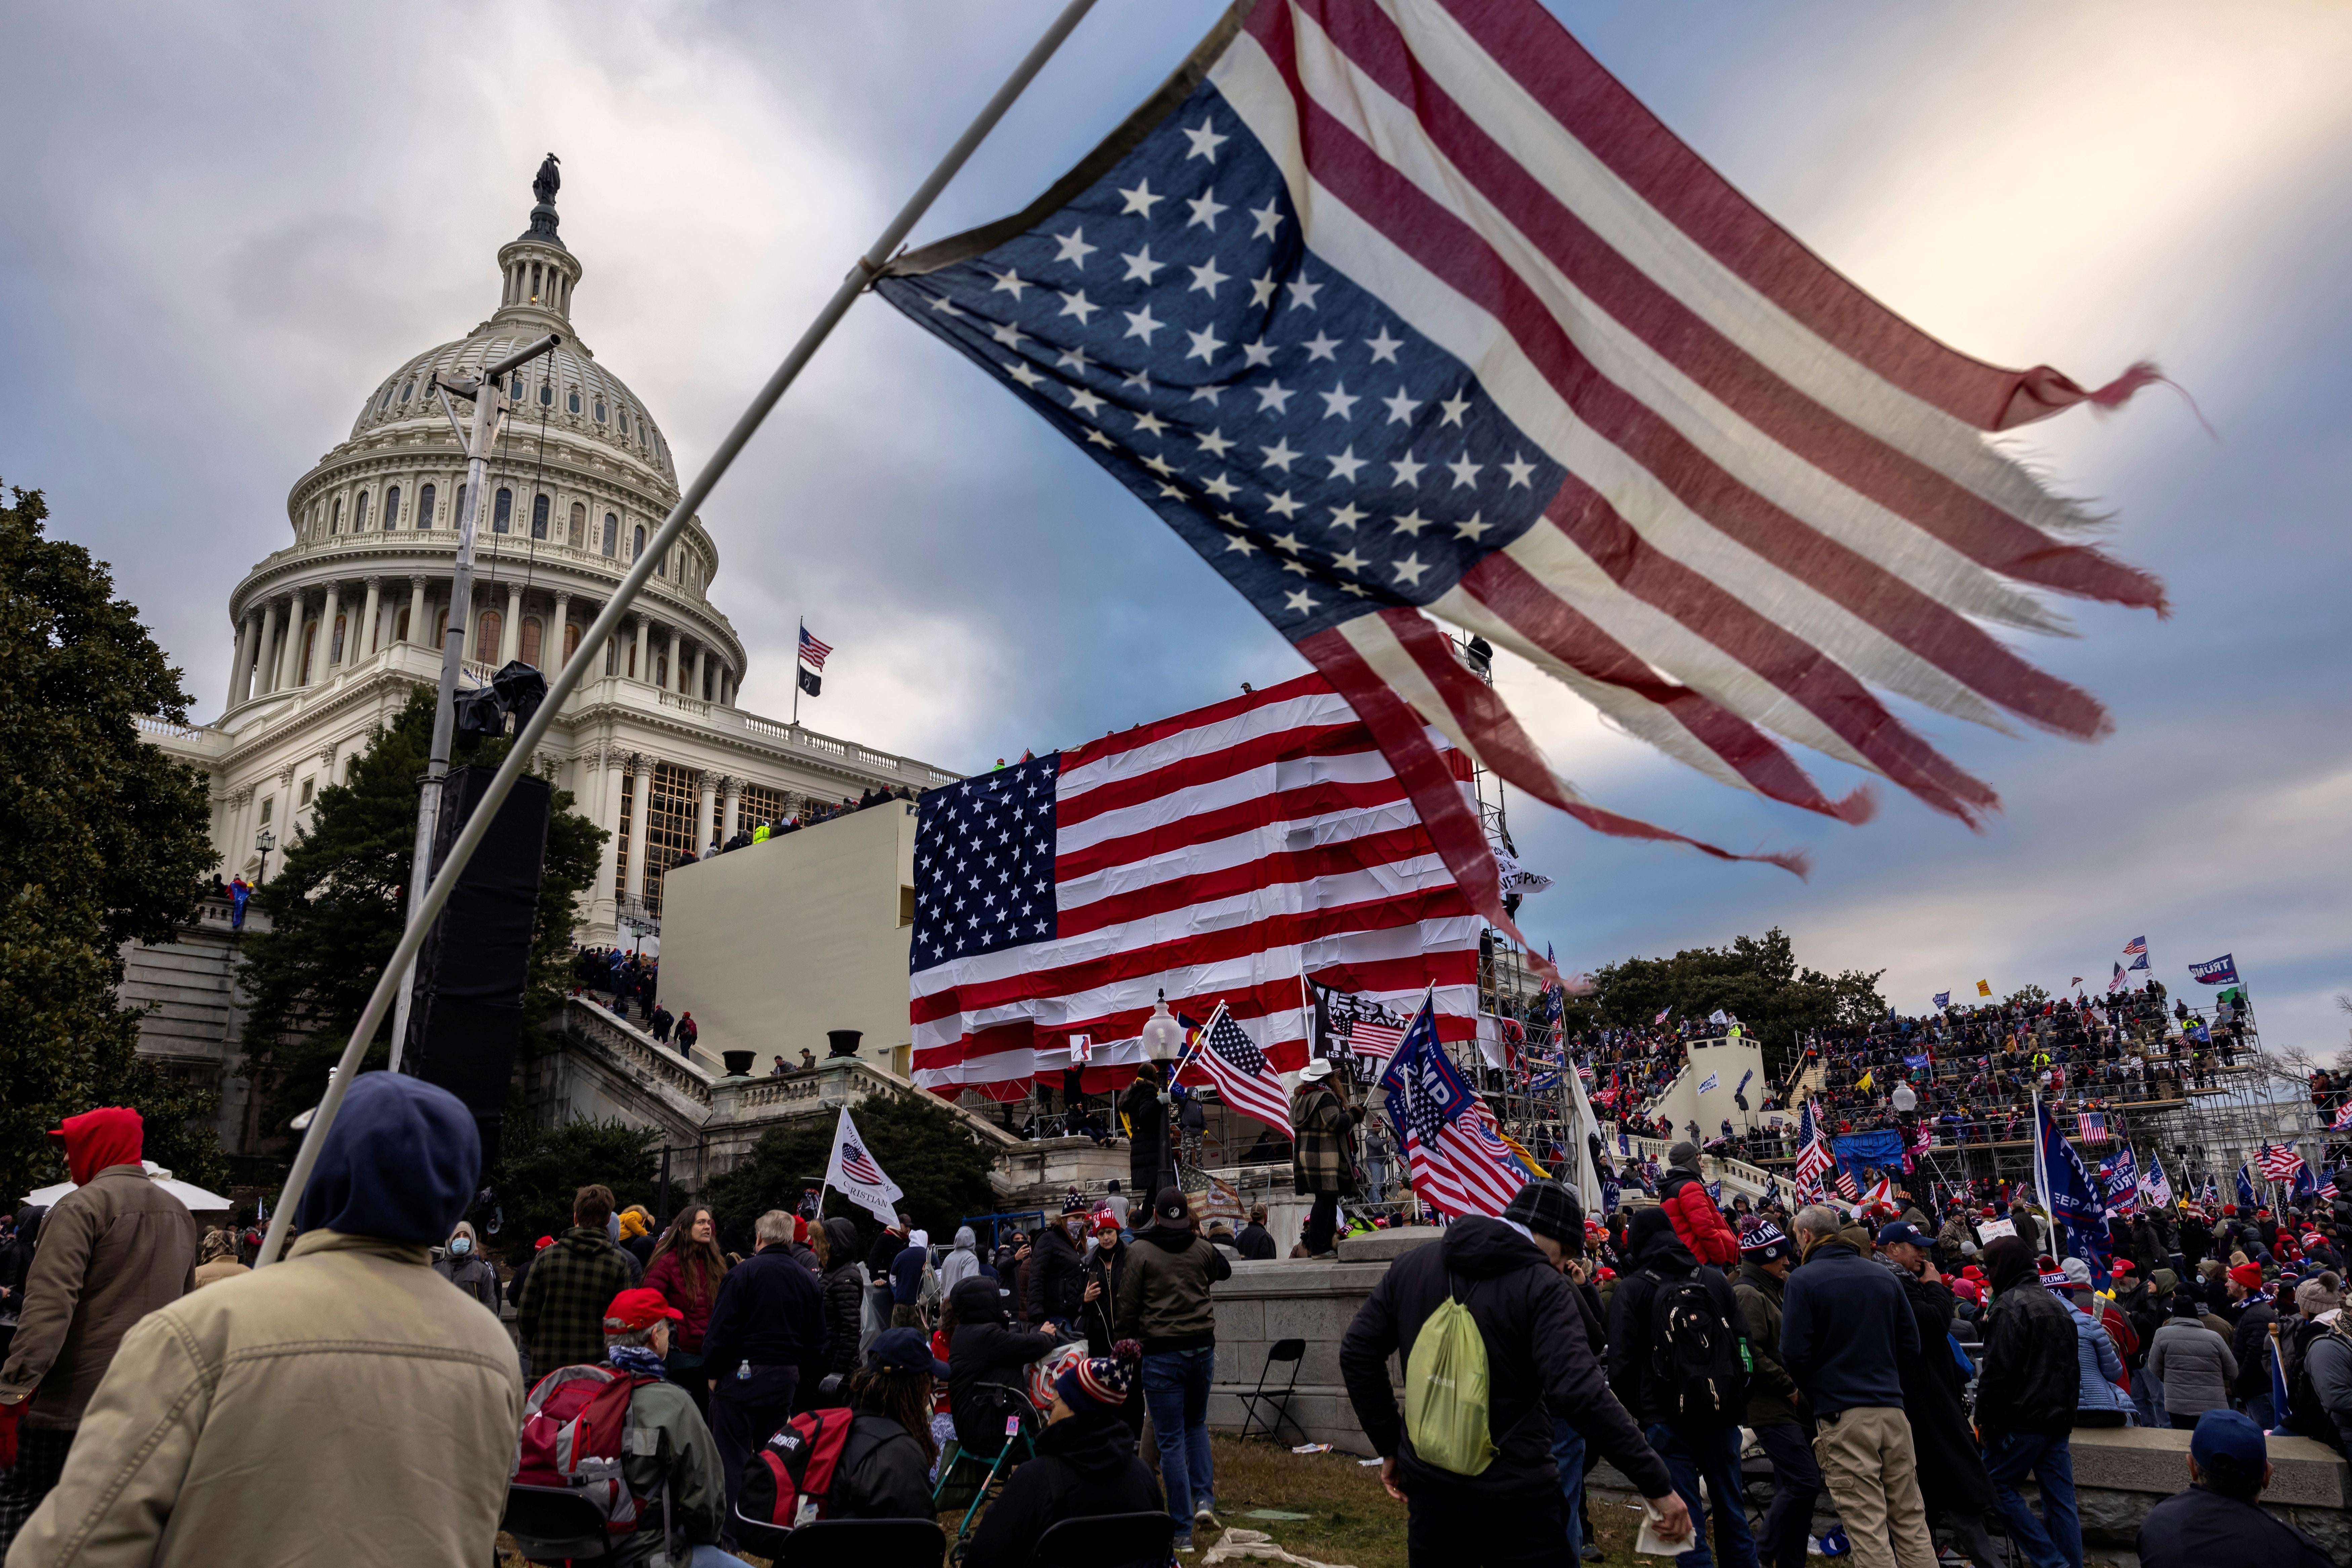 People massed on the steps of the Capitol, with a tattered American flag flying in the foreground